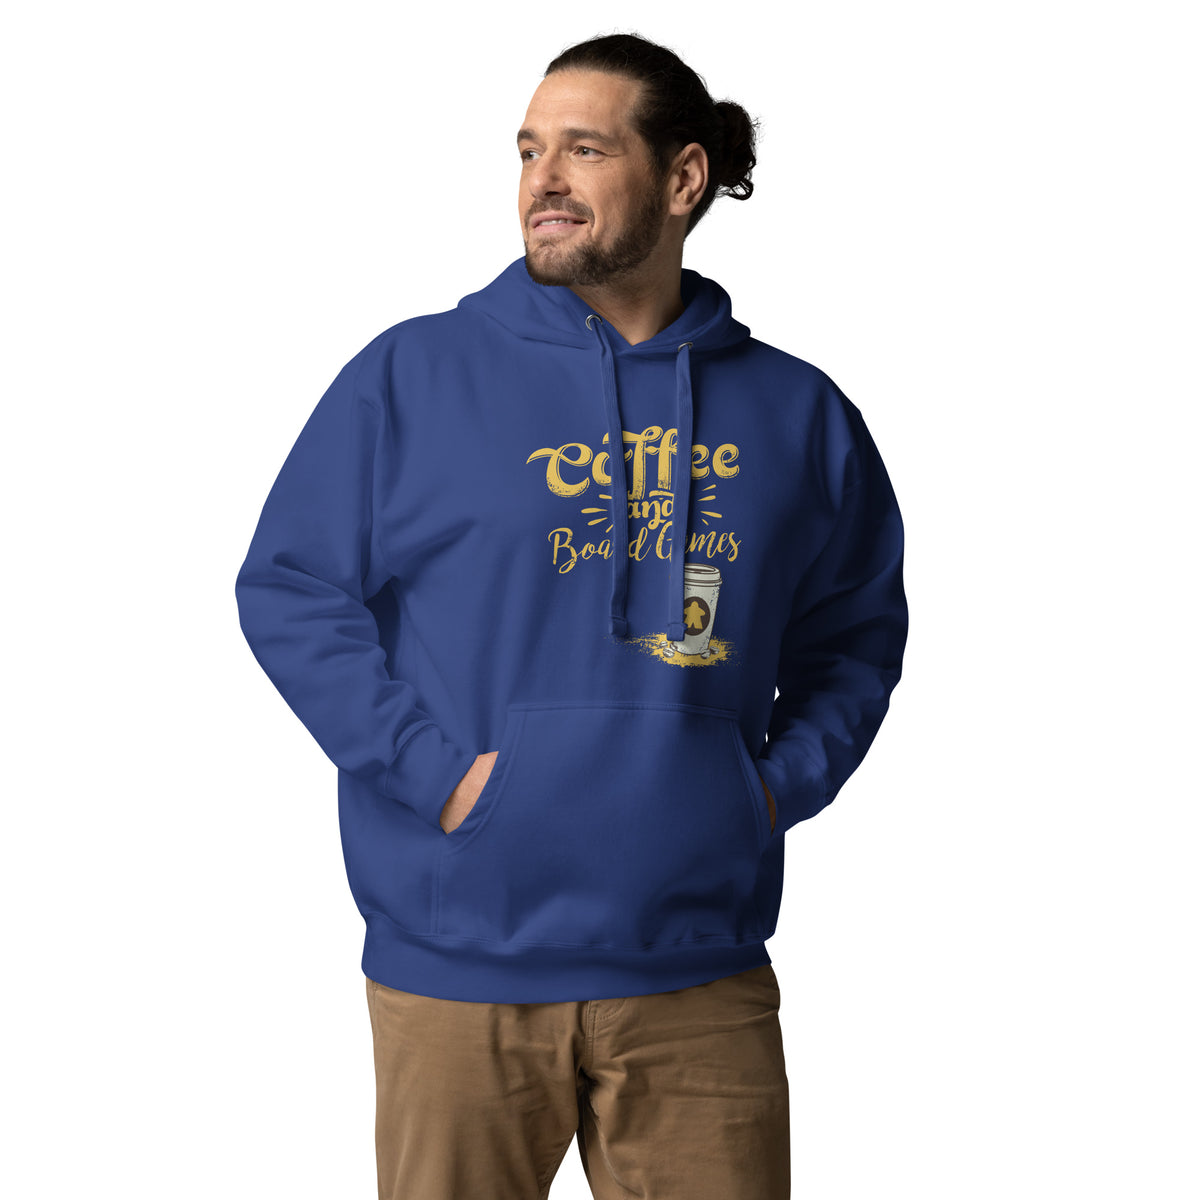 Coffee &amp; Board Games To Go Pullover Hoodie